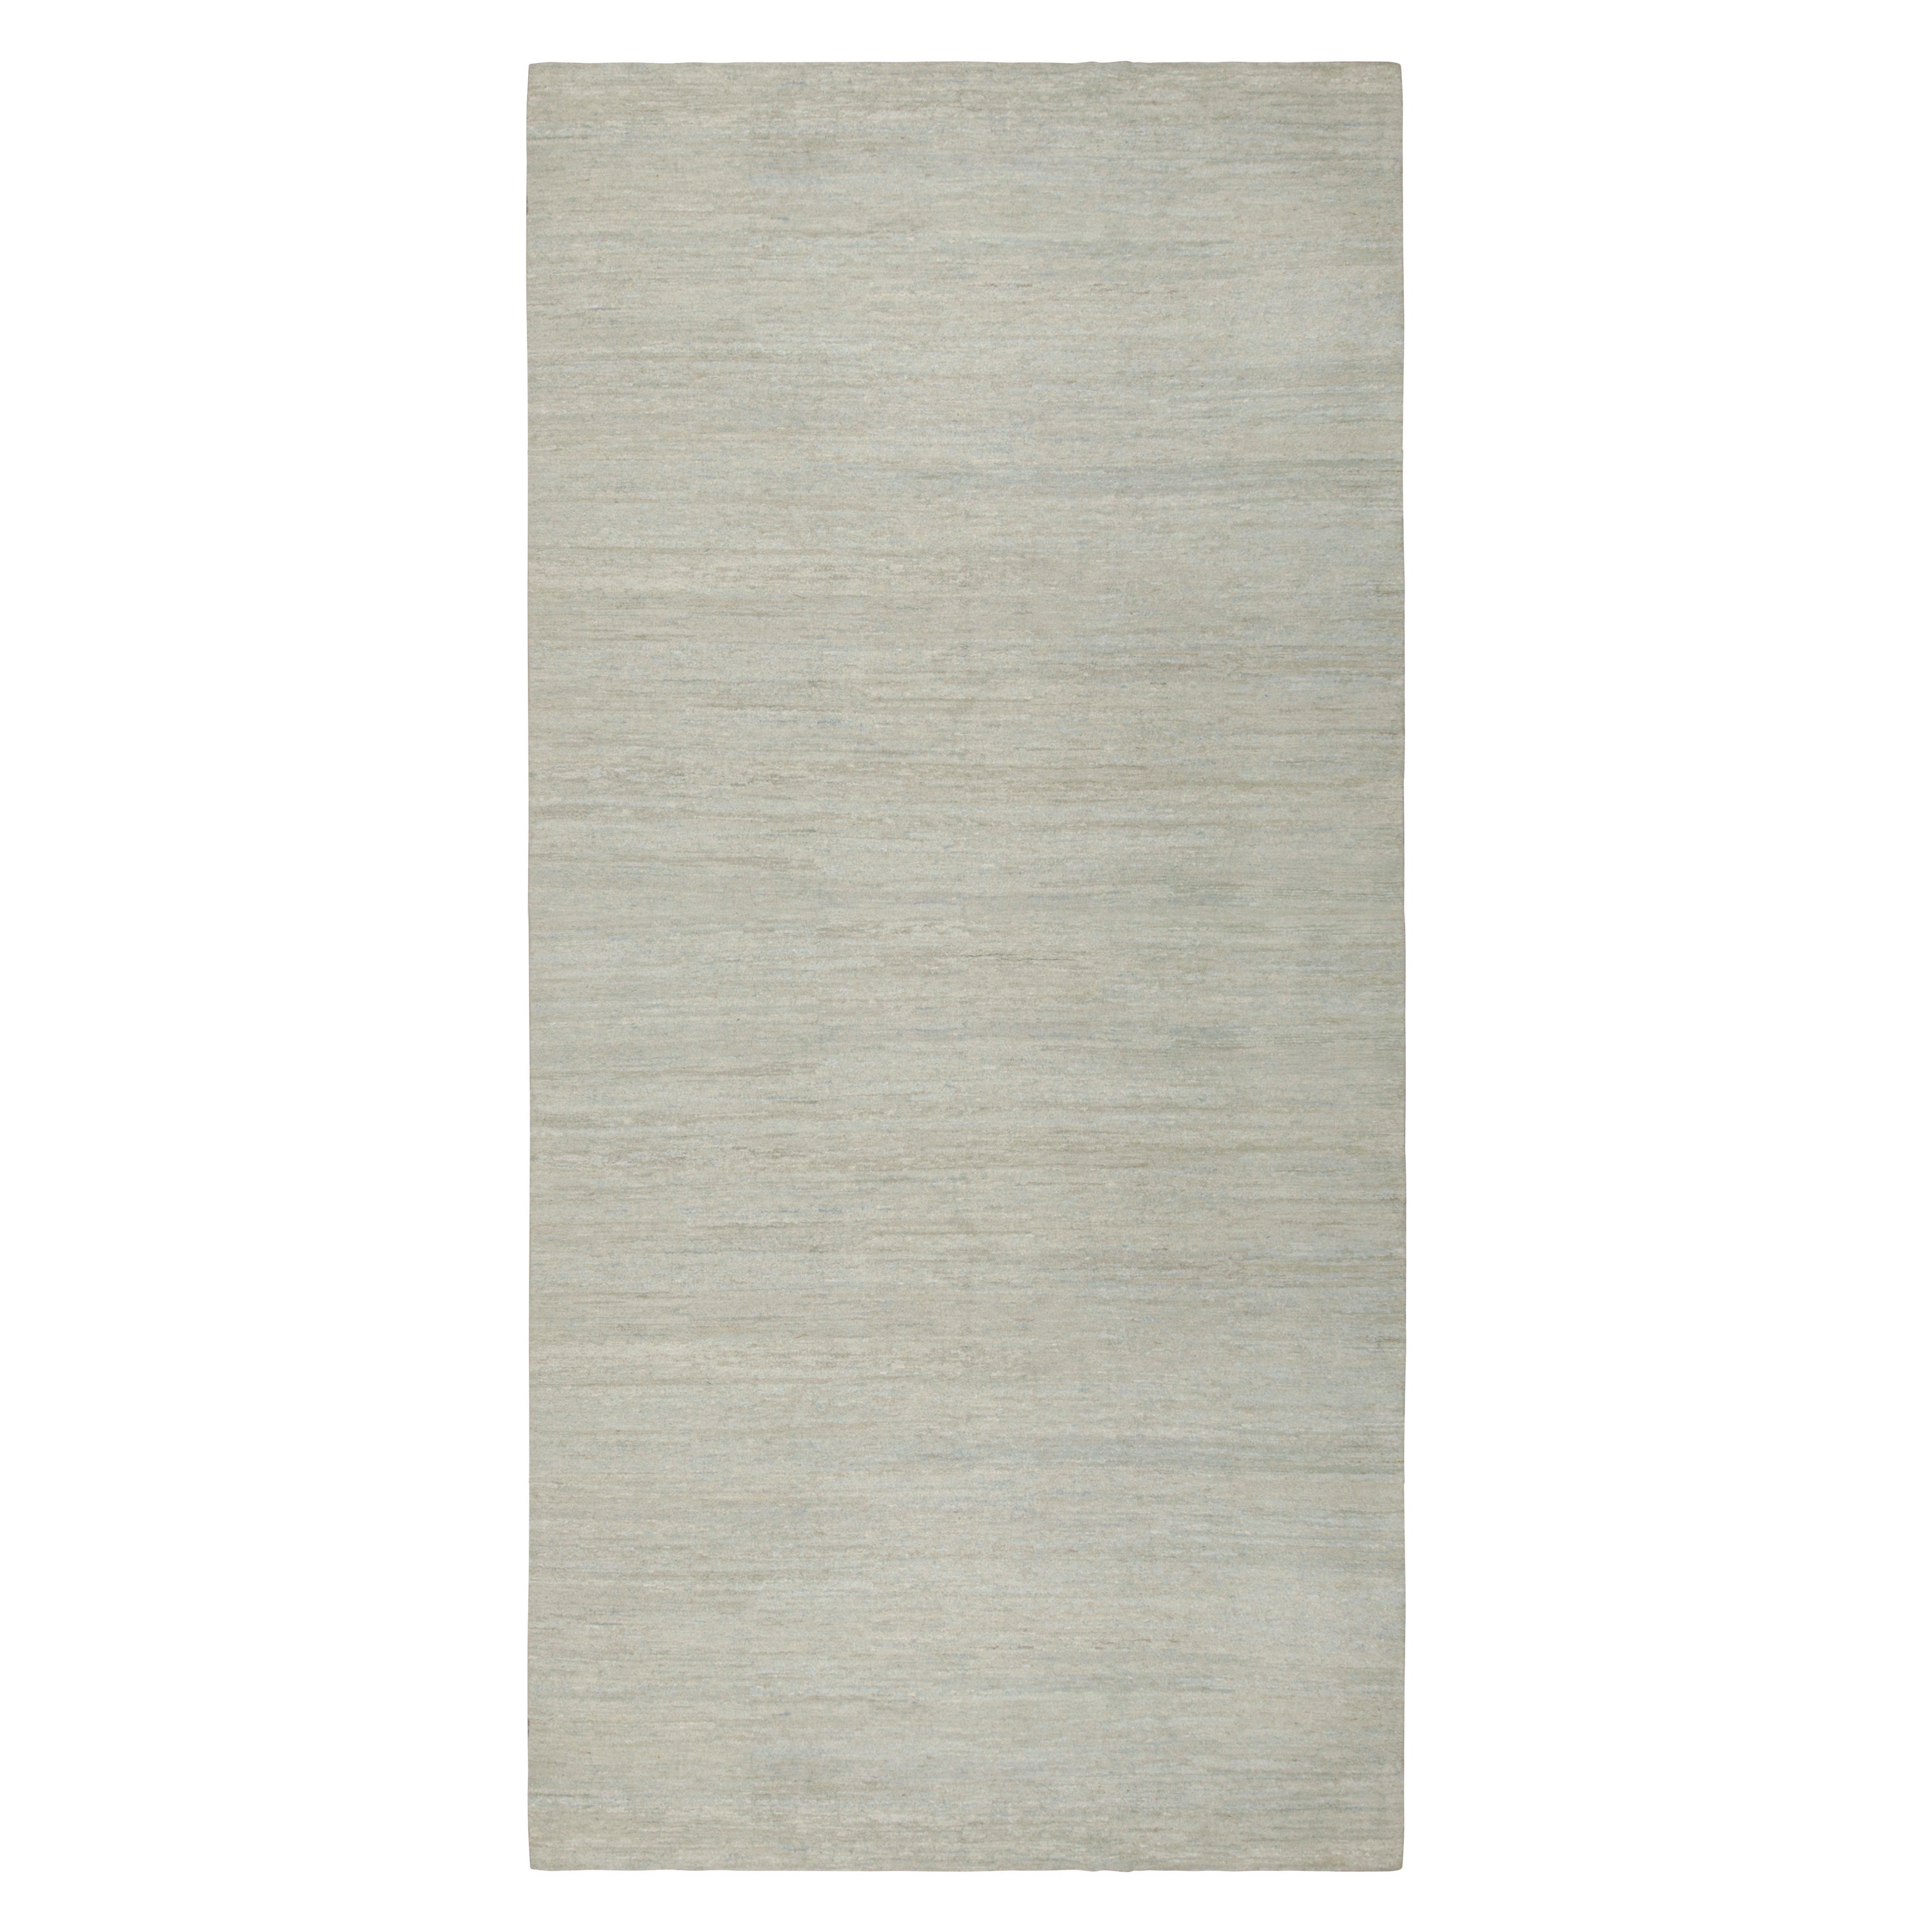 Hand-knotted in wool, this 9x17 contemporary rug in beige and gray as an addition to the Rug & Kilim Textural Collection, is an inventive take on solid rugs with movement in its subtle striae. 

On the Design: 

The collection enjoys an inventive